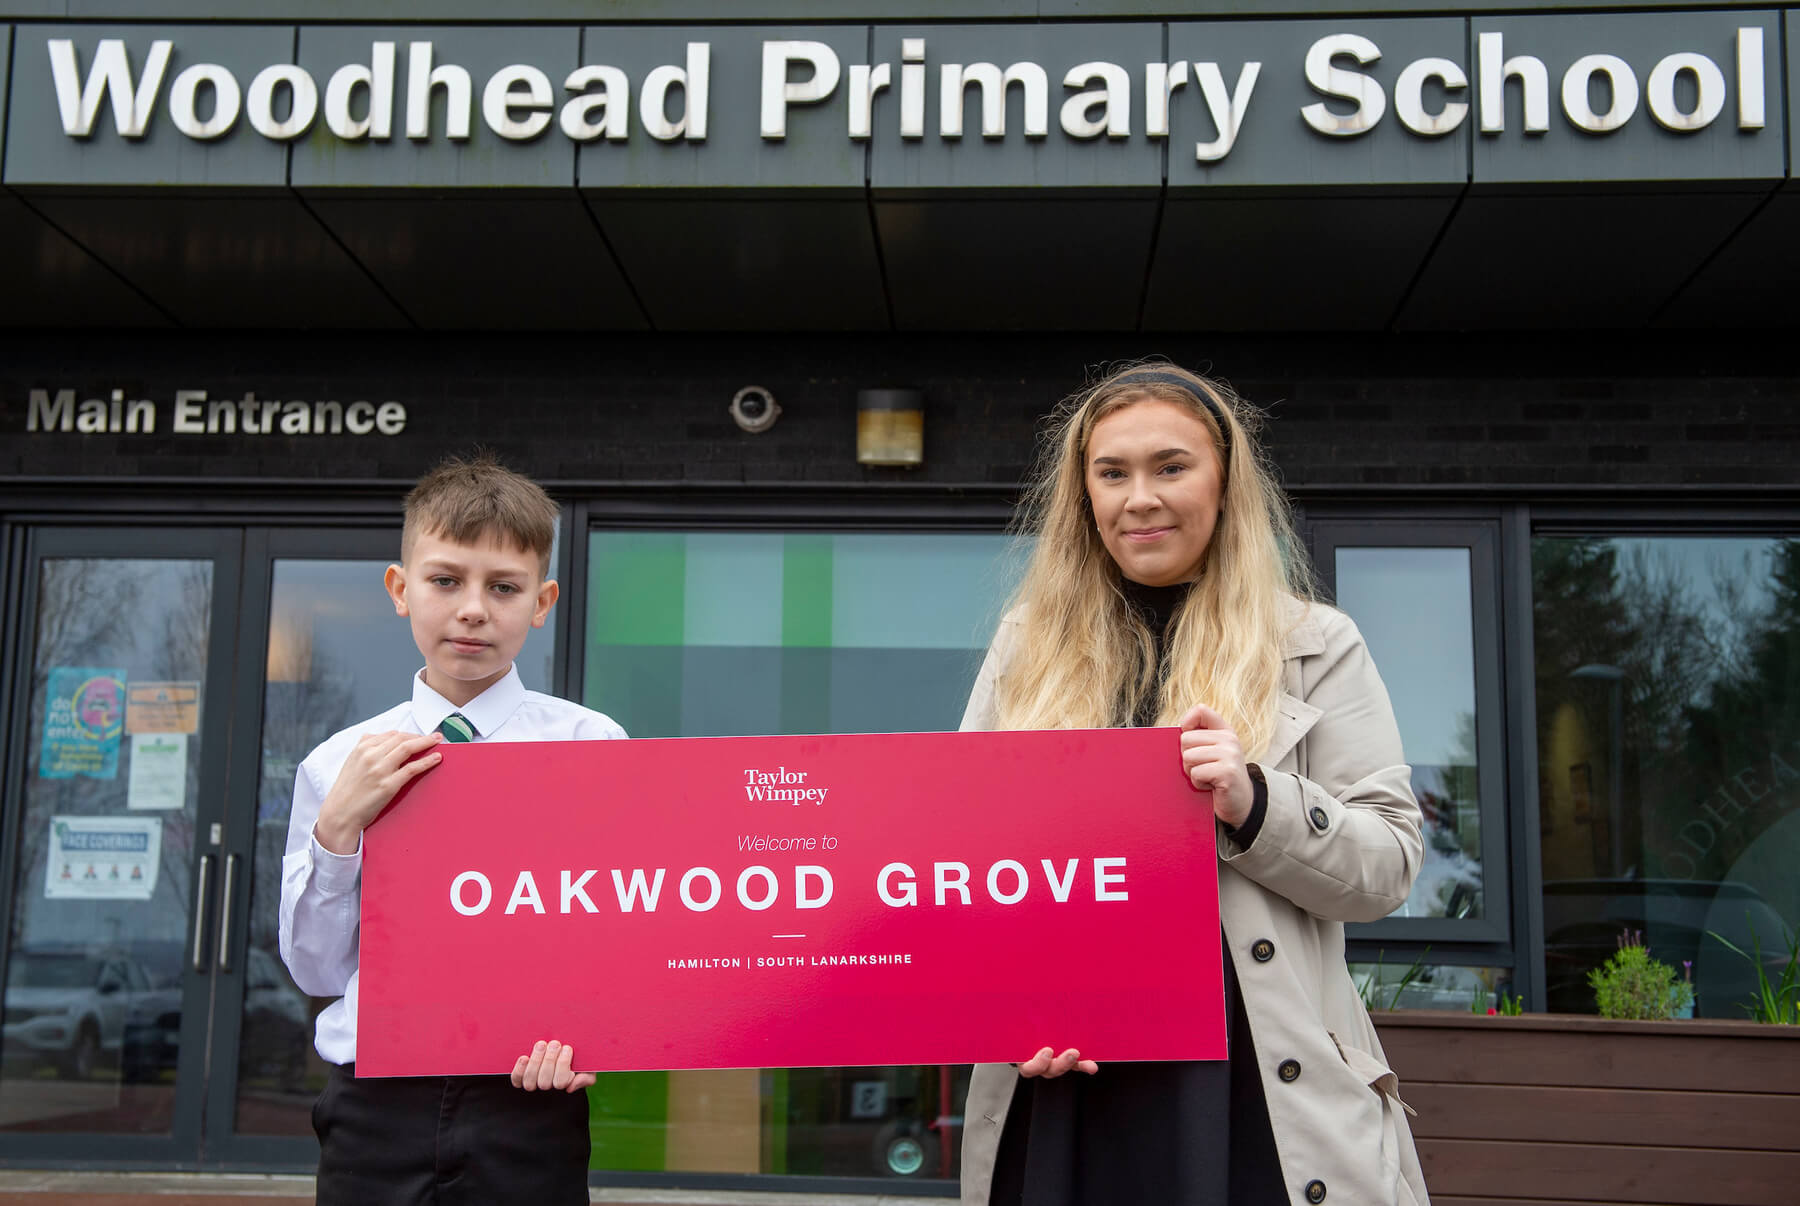 Oakwood Grove naming competition Taylor Wimpey Hamilton